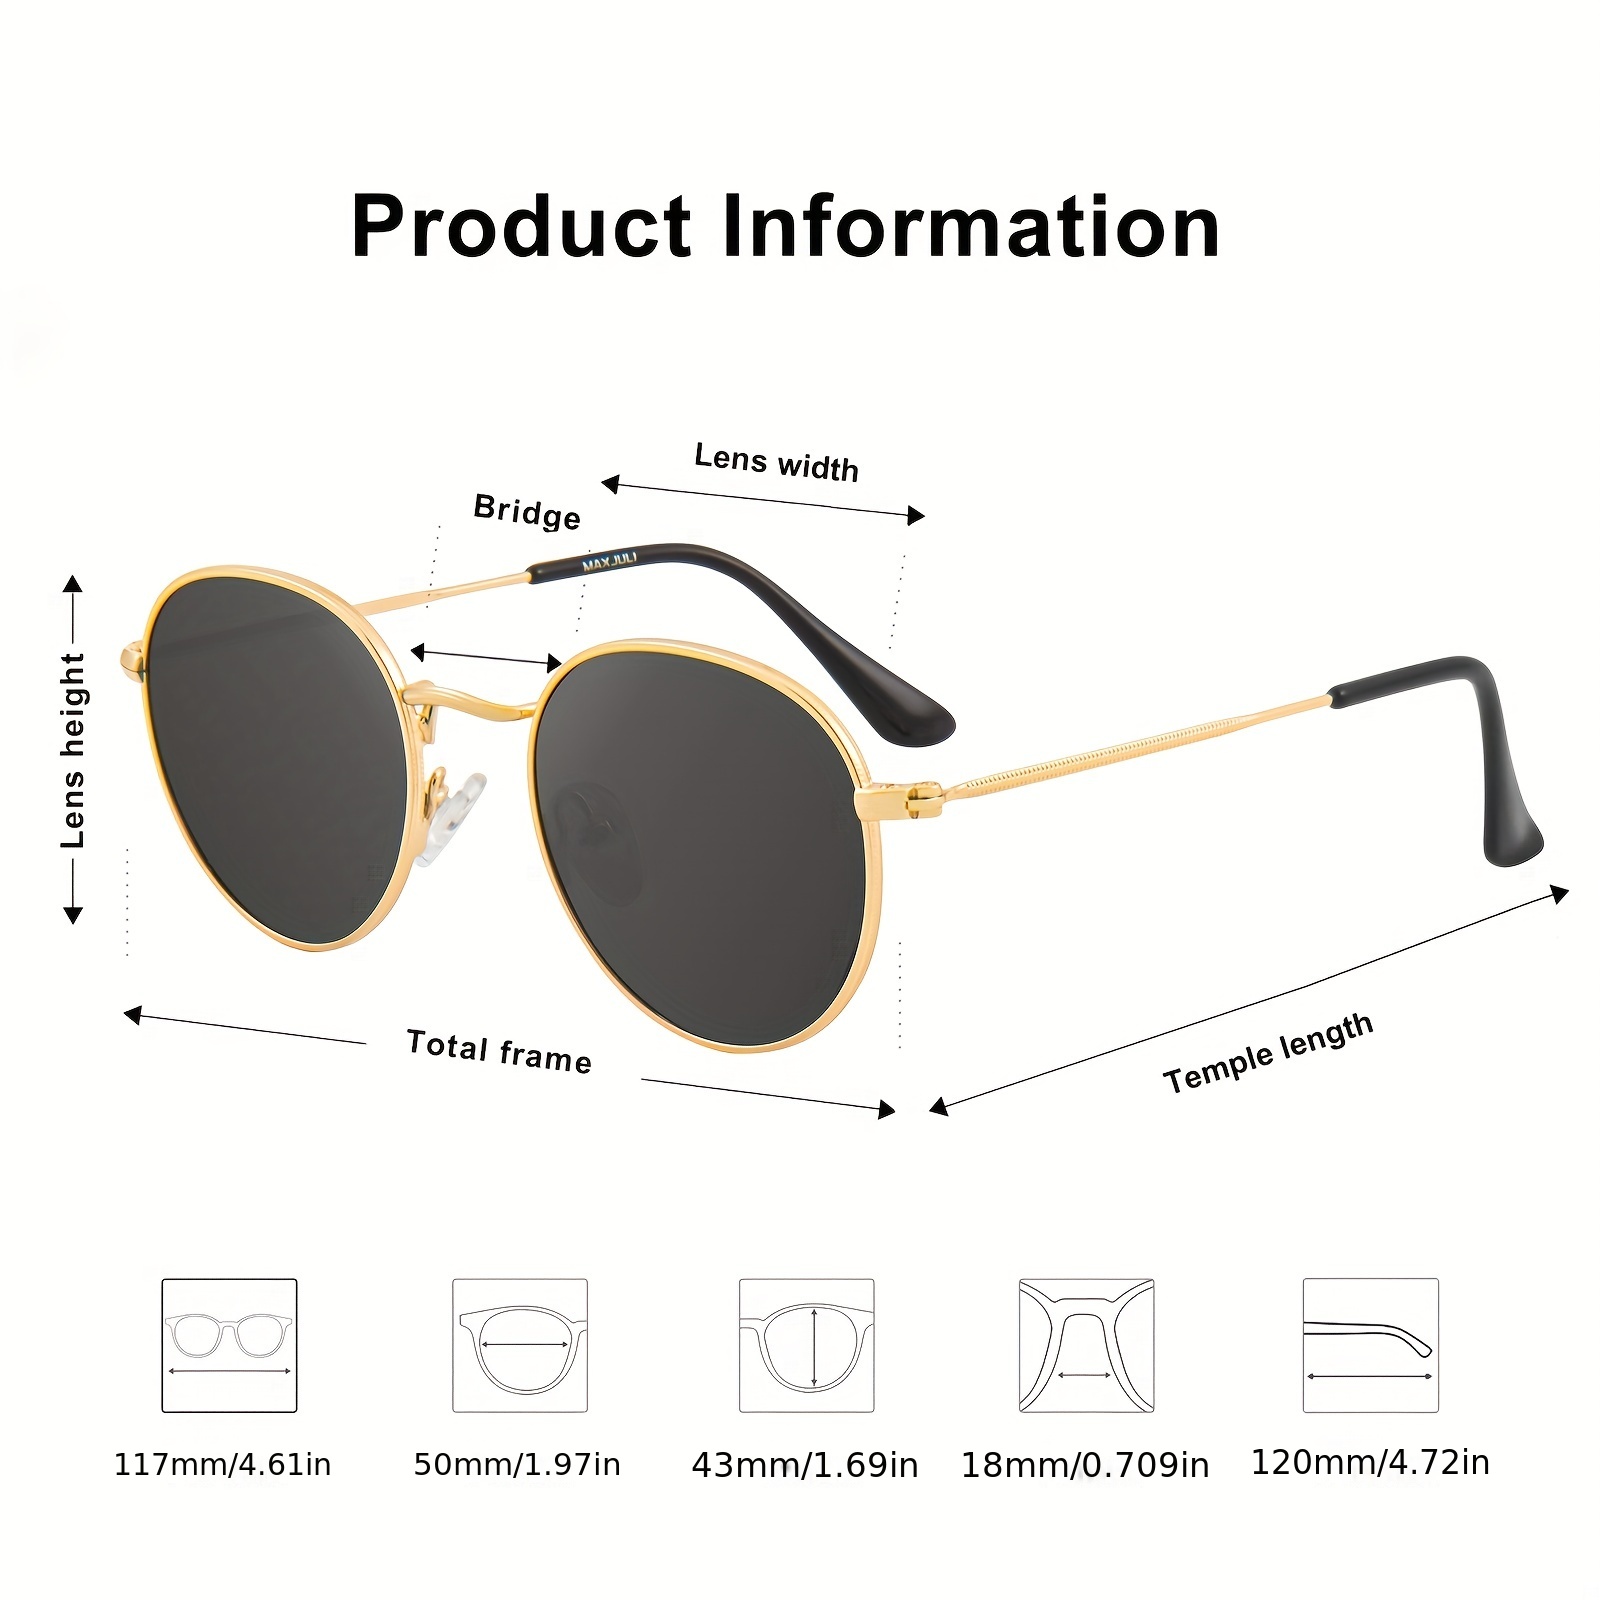 1pair Children's Scratch-Resistant Anti-Glare Polarized Sunglasses, with Ultra-Light Metal Frame and Soft Non-Slip Nose Pads, Suitable for Outdoor